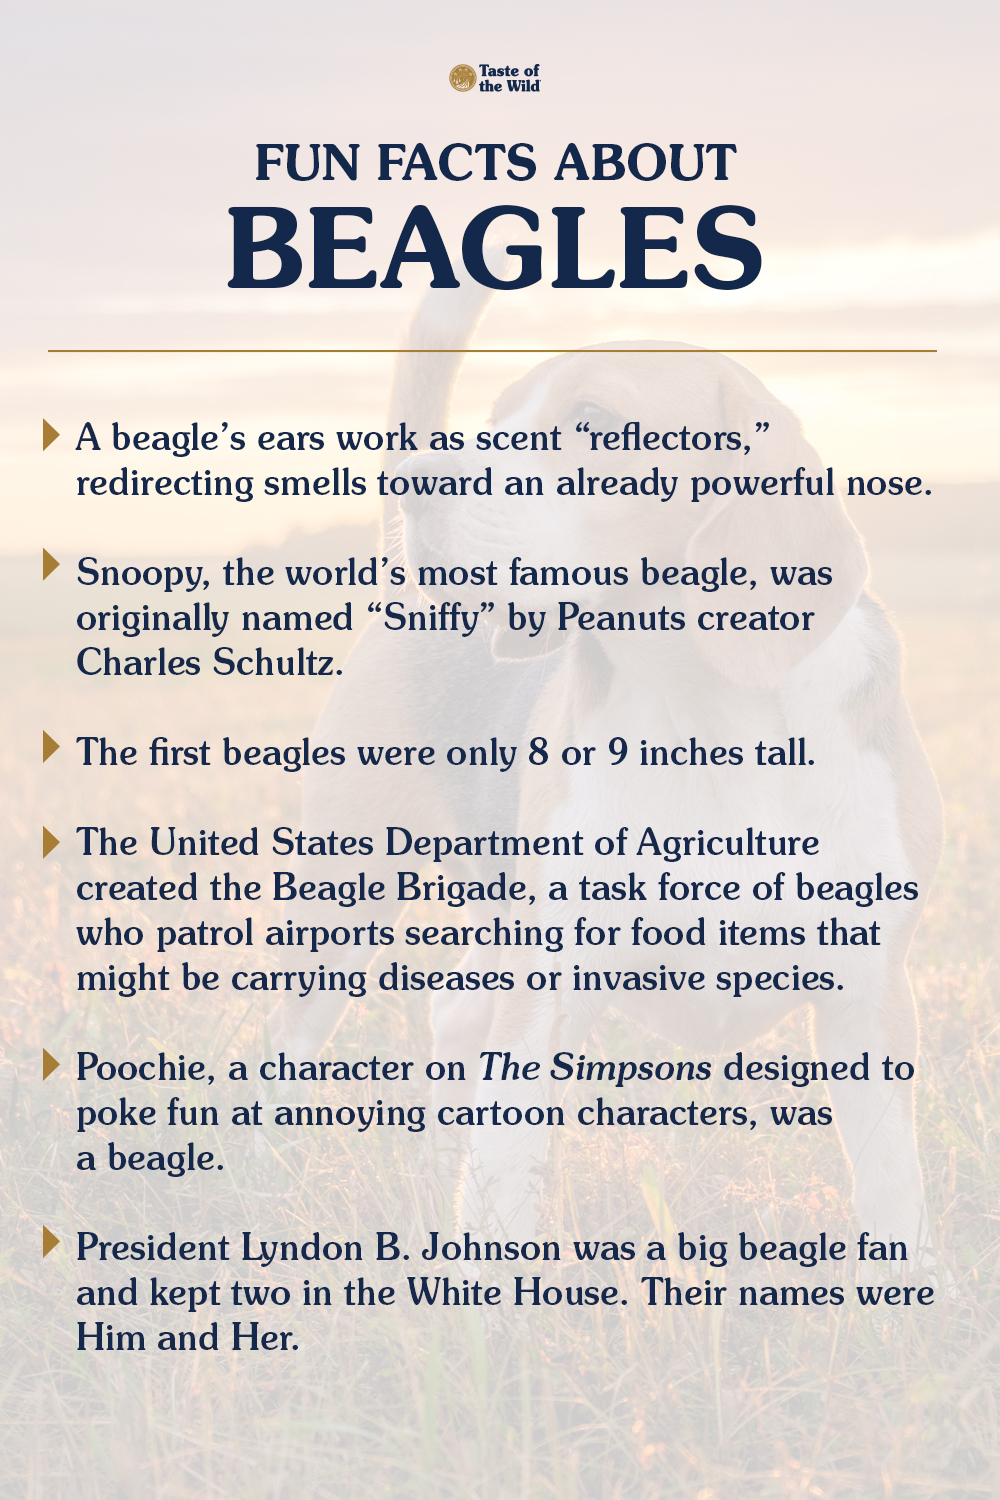 Fun Facts About Beagles Info Graphic | Taste of the Wild